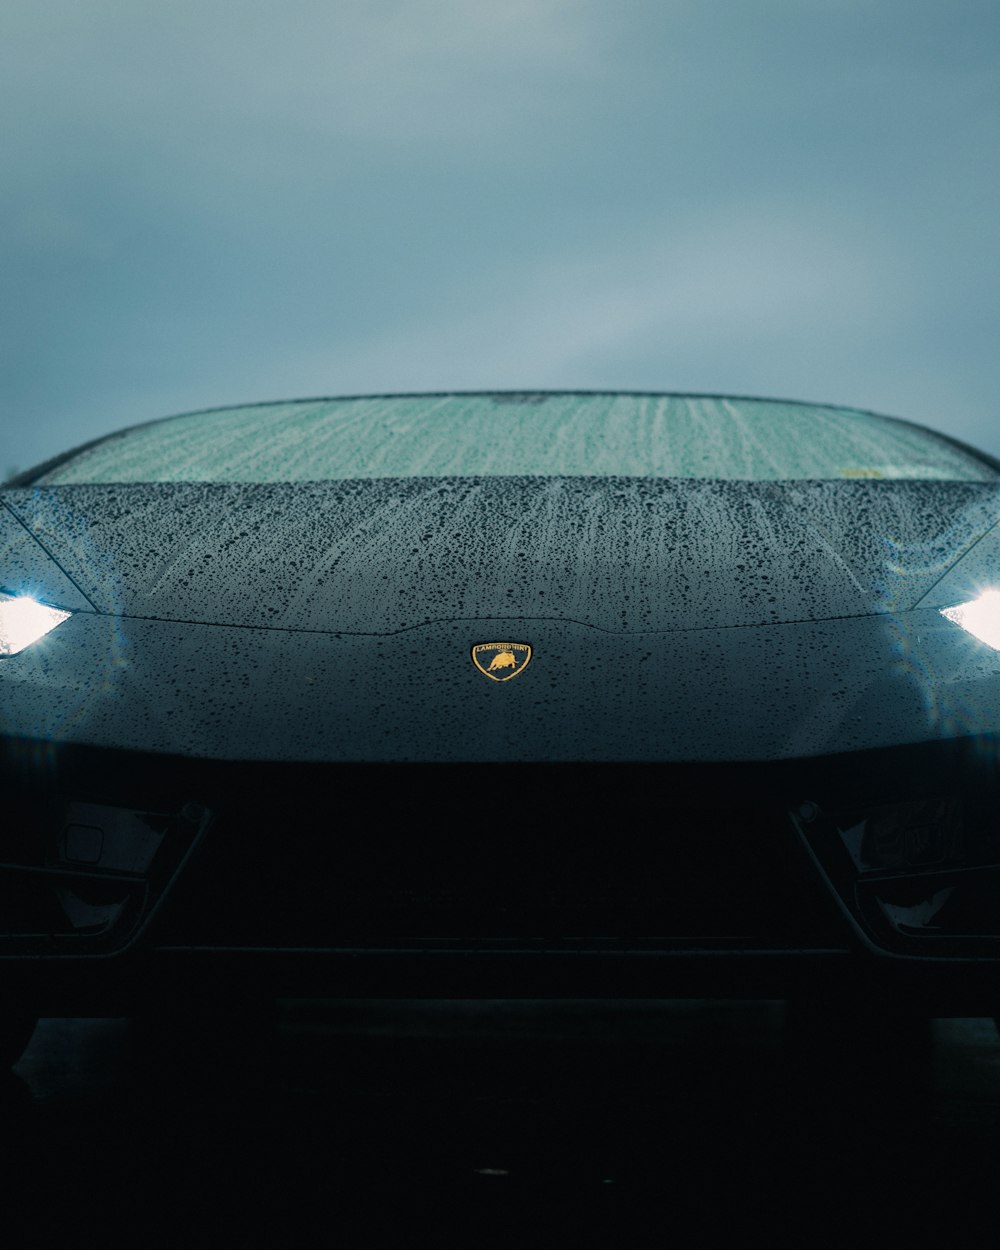 the front of a black sports car on a cloudy day